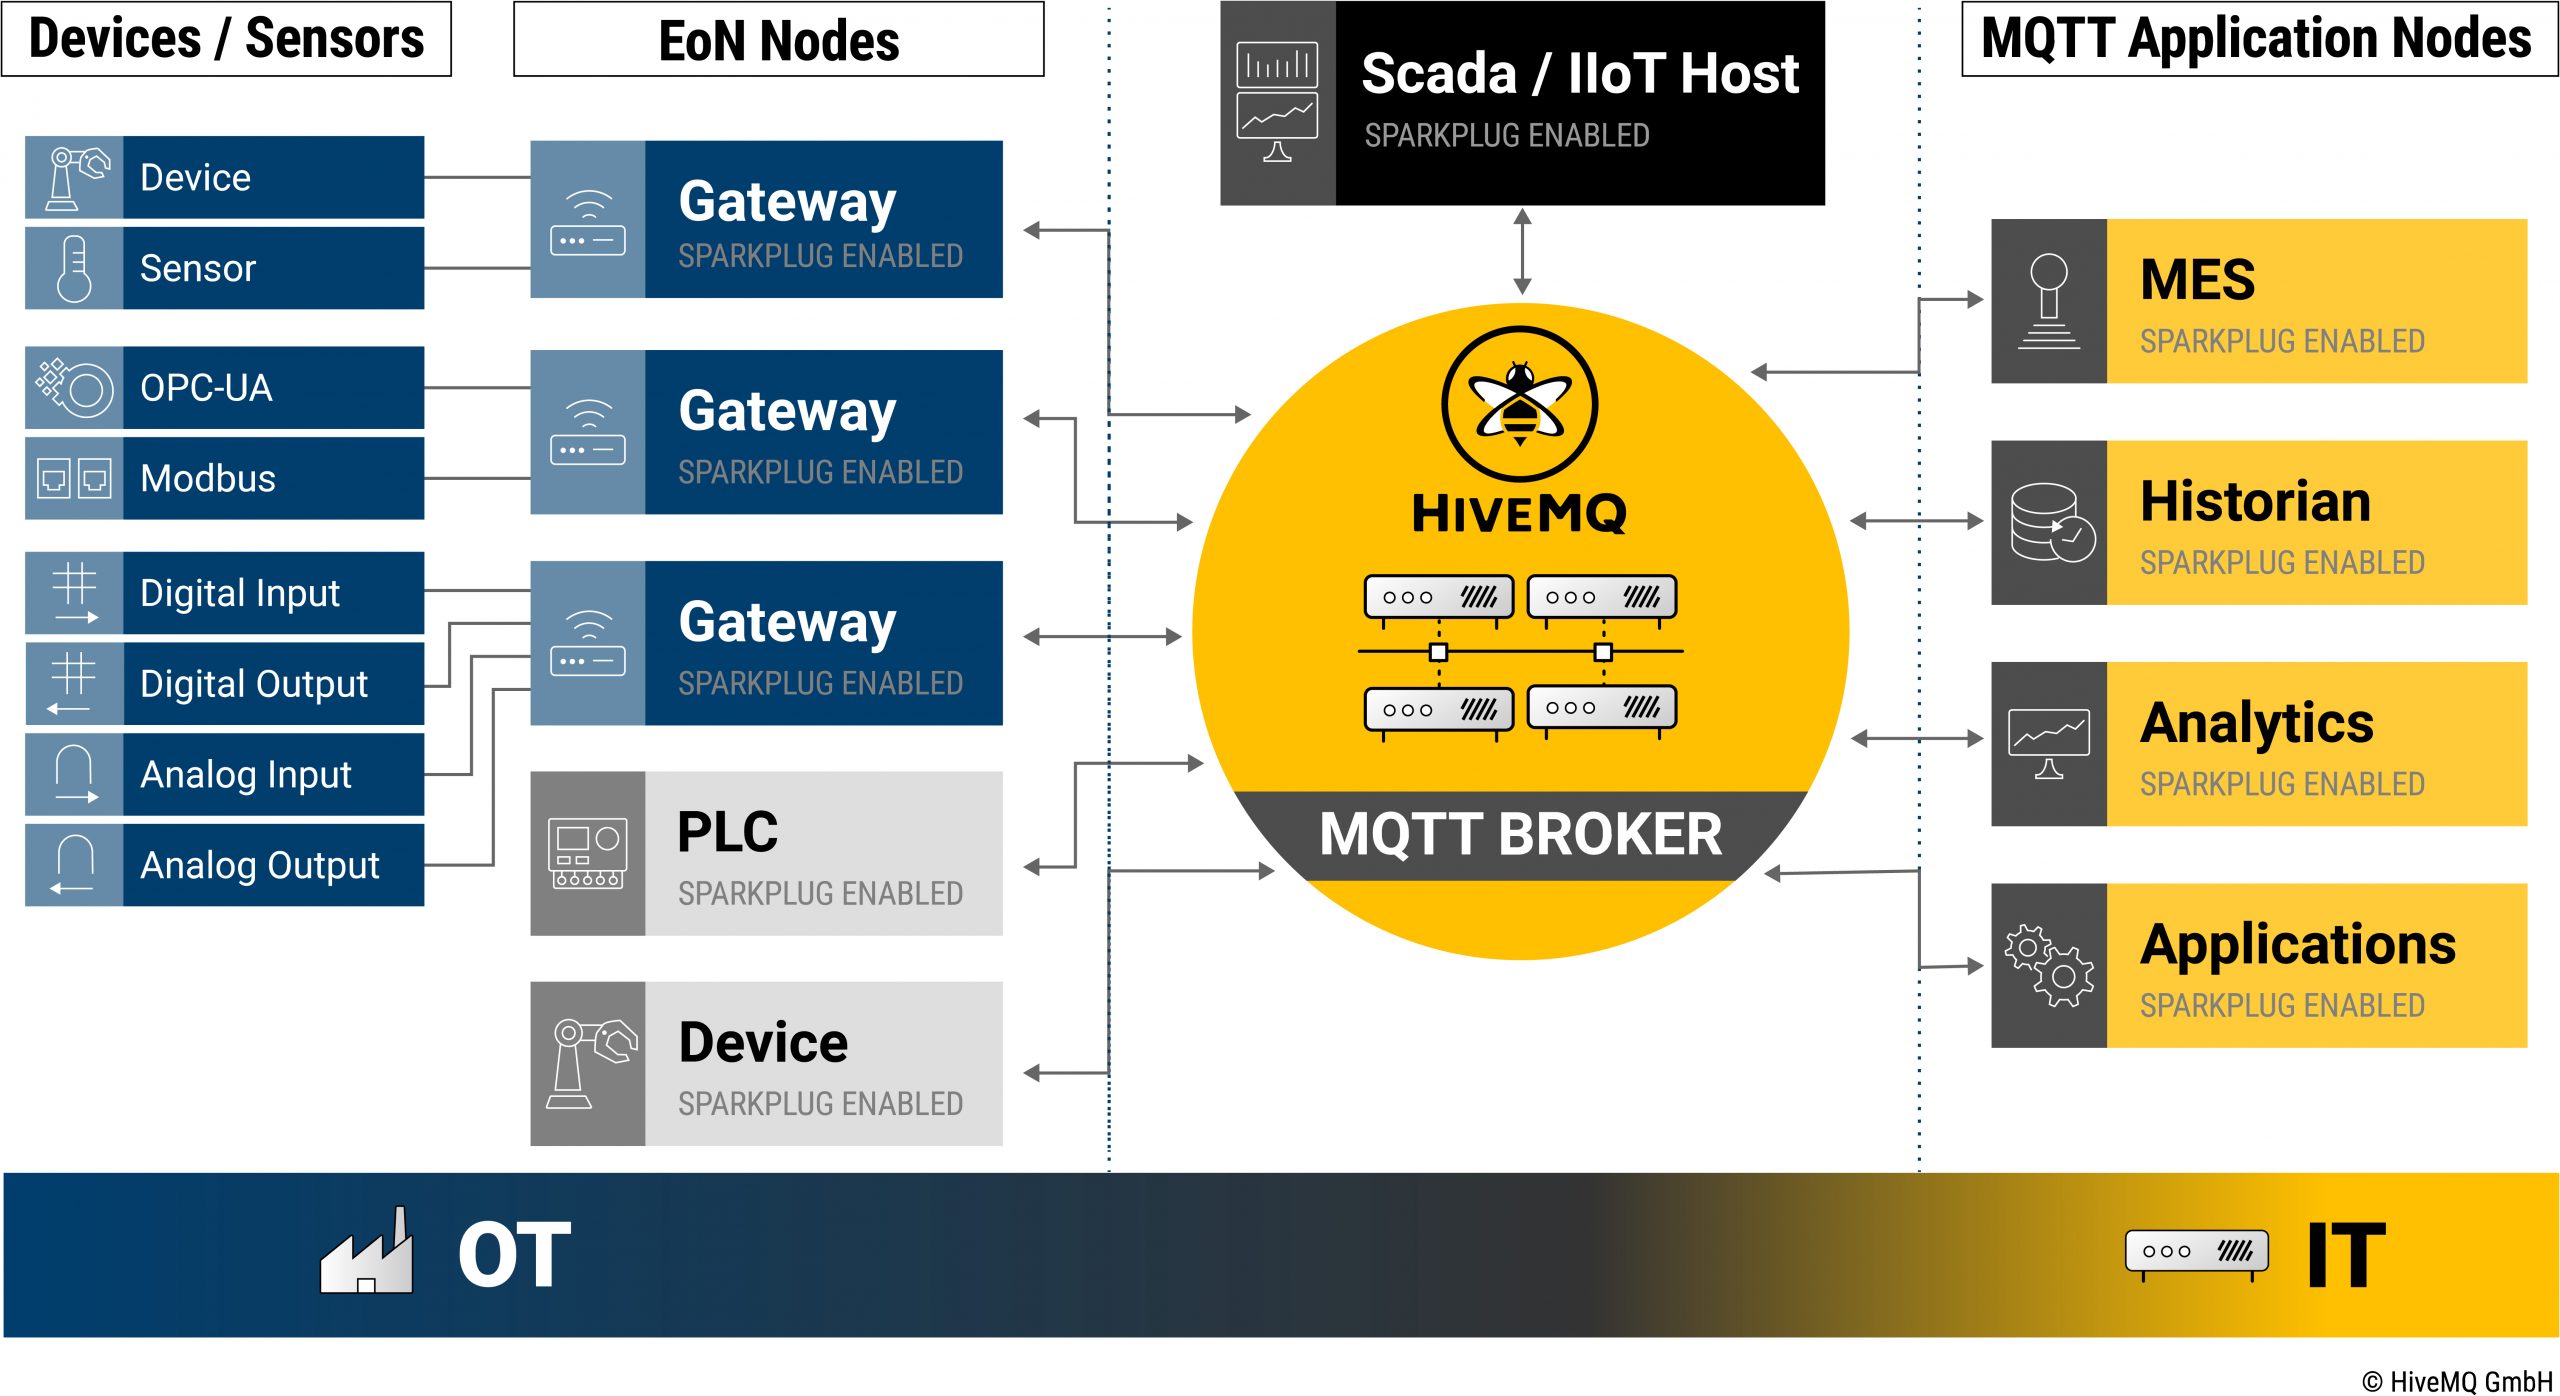 HIVEMQ SCADA host and the IT applications